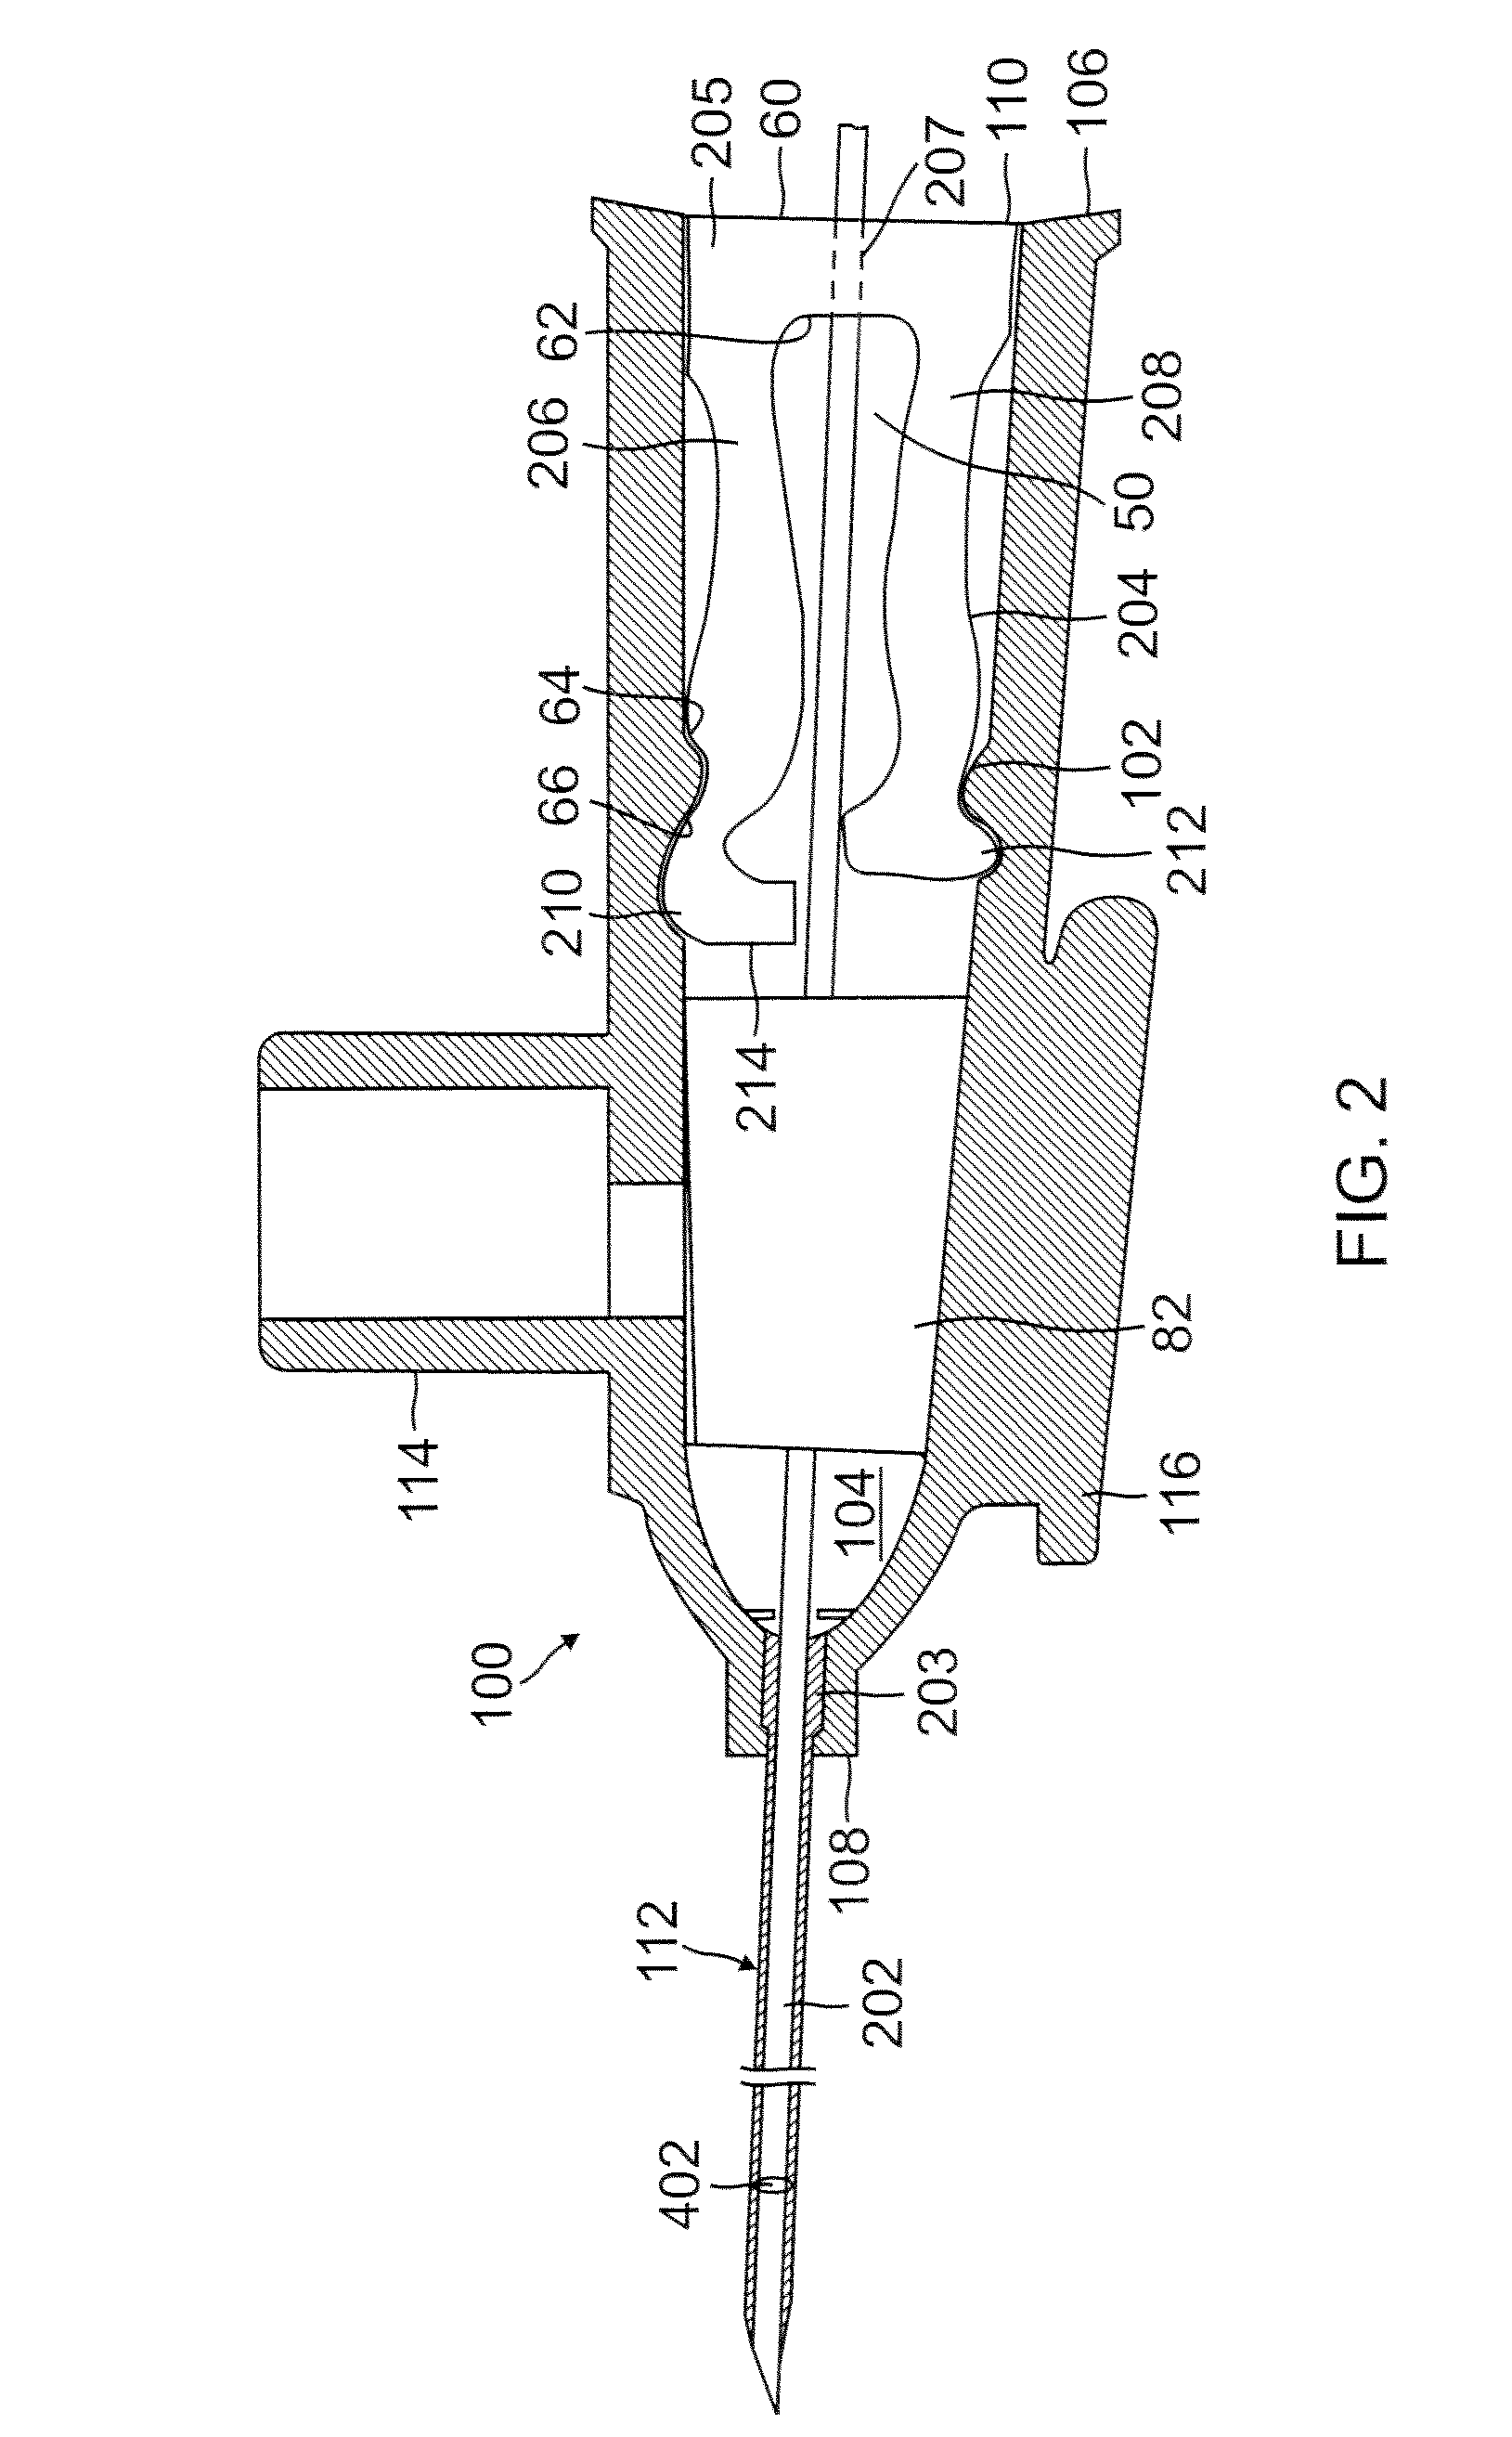 Needle safety device and assembly